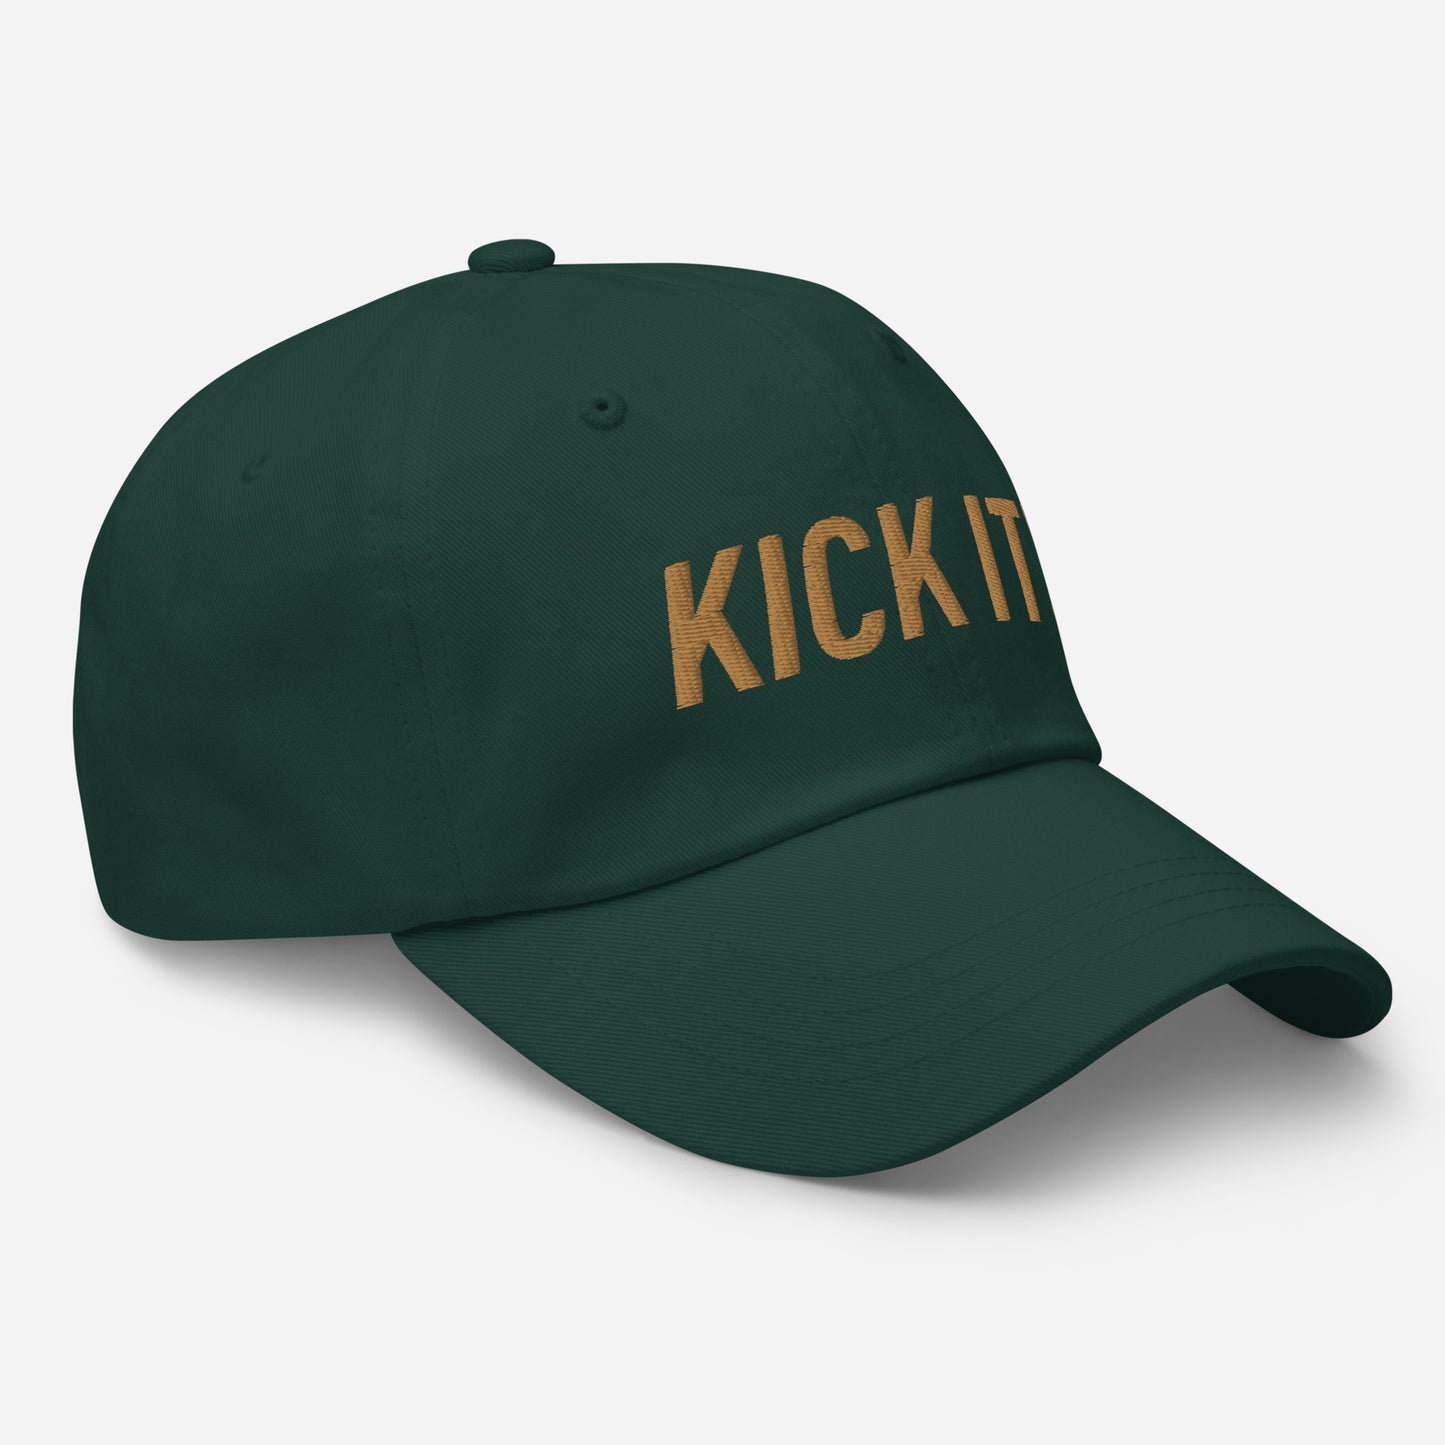 Kick It! Dad hat - Old Gold letters